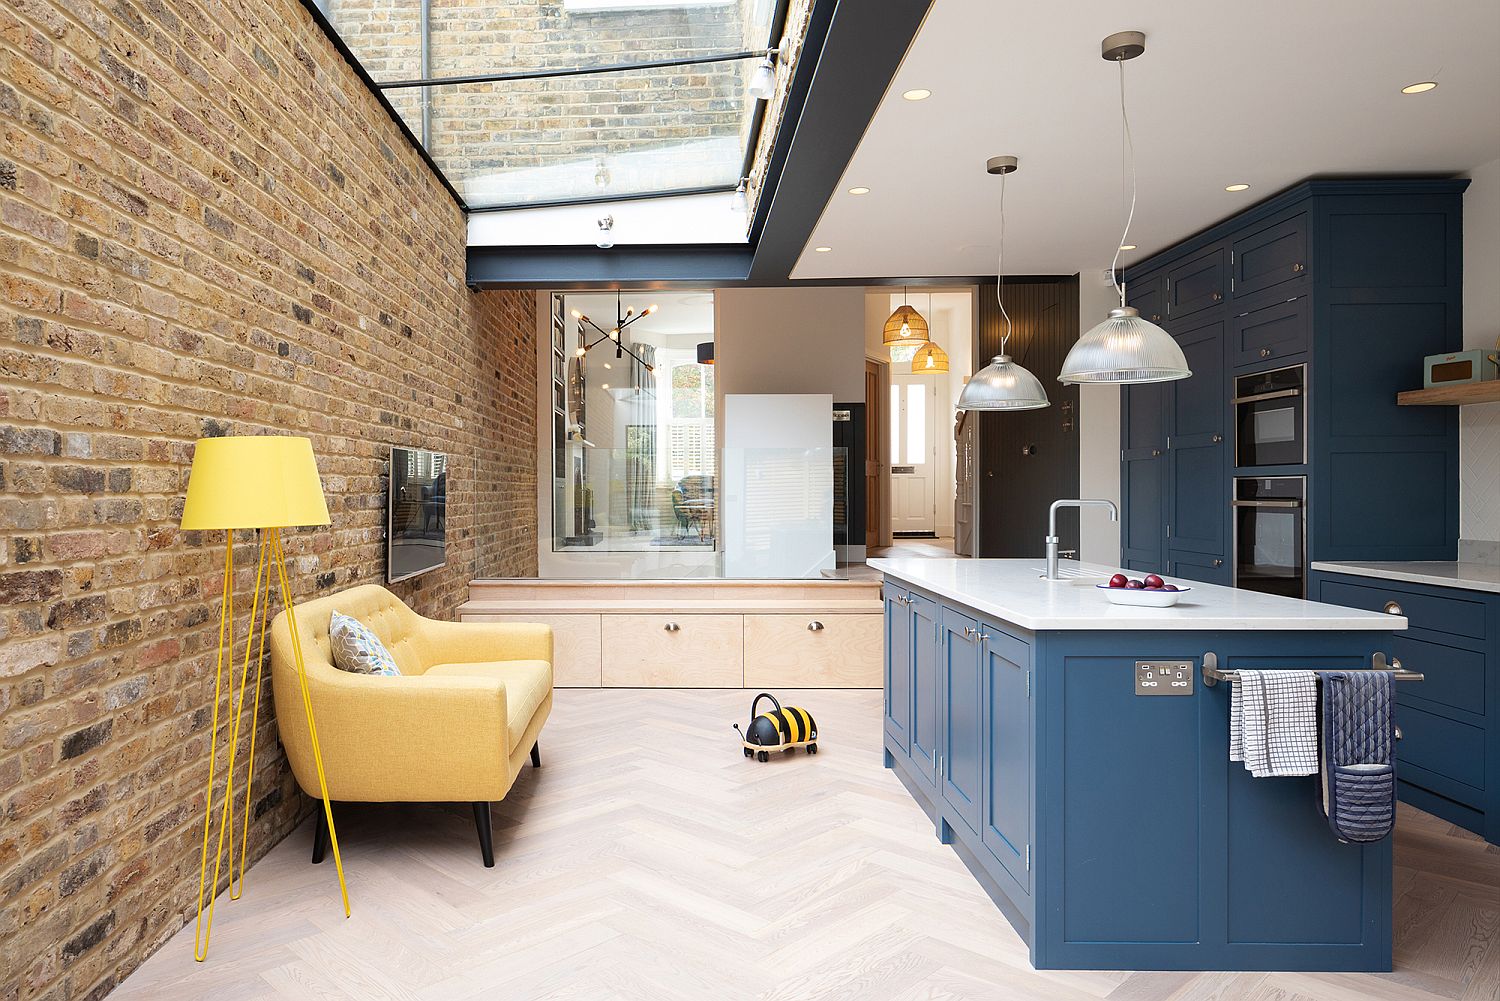 Fantastic kitchen area and social zone of London home with skylight and brick wall